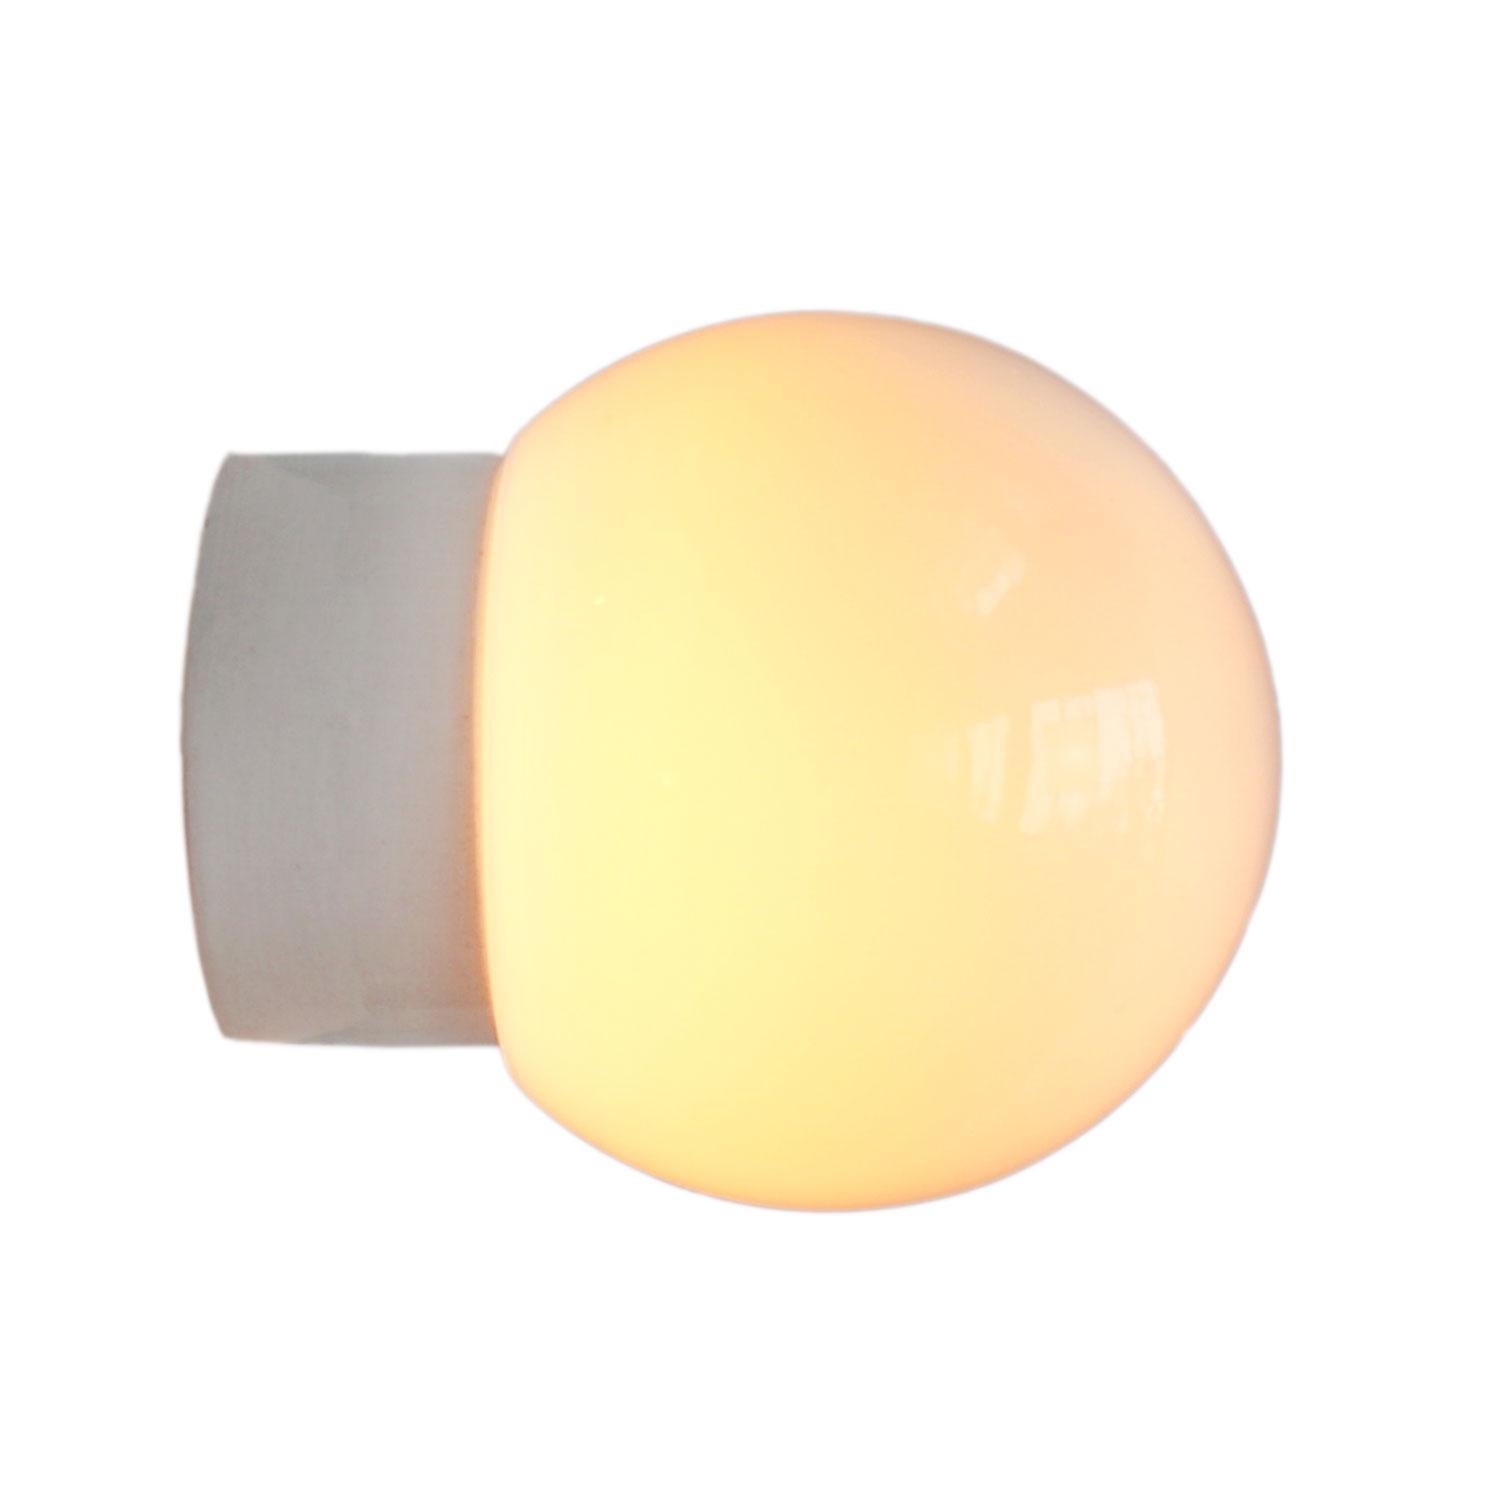 Industrial ceiling lamp.
White porcelain, white opaline glass.
2 conductors, no ground.
Measures: Diameter foot 10 cm

Weight: 1.1 kg / 2.4 lb

Priced per individual item. All lamps have been made suitable by international standards for